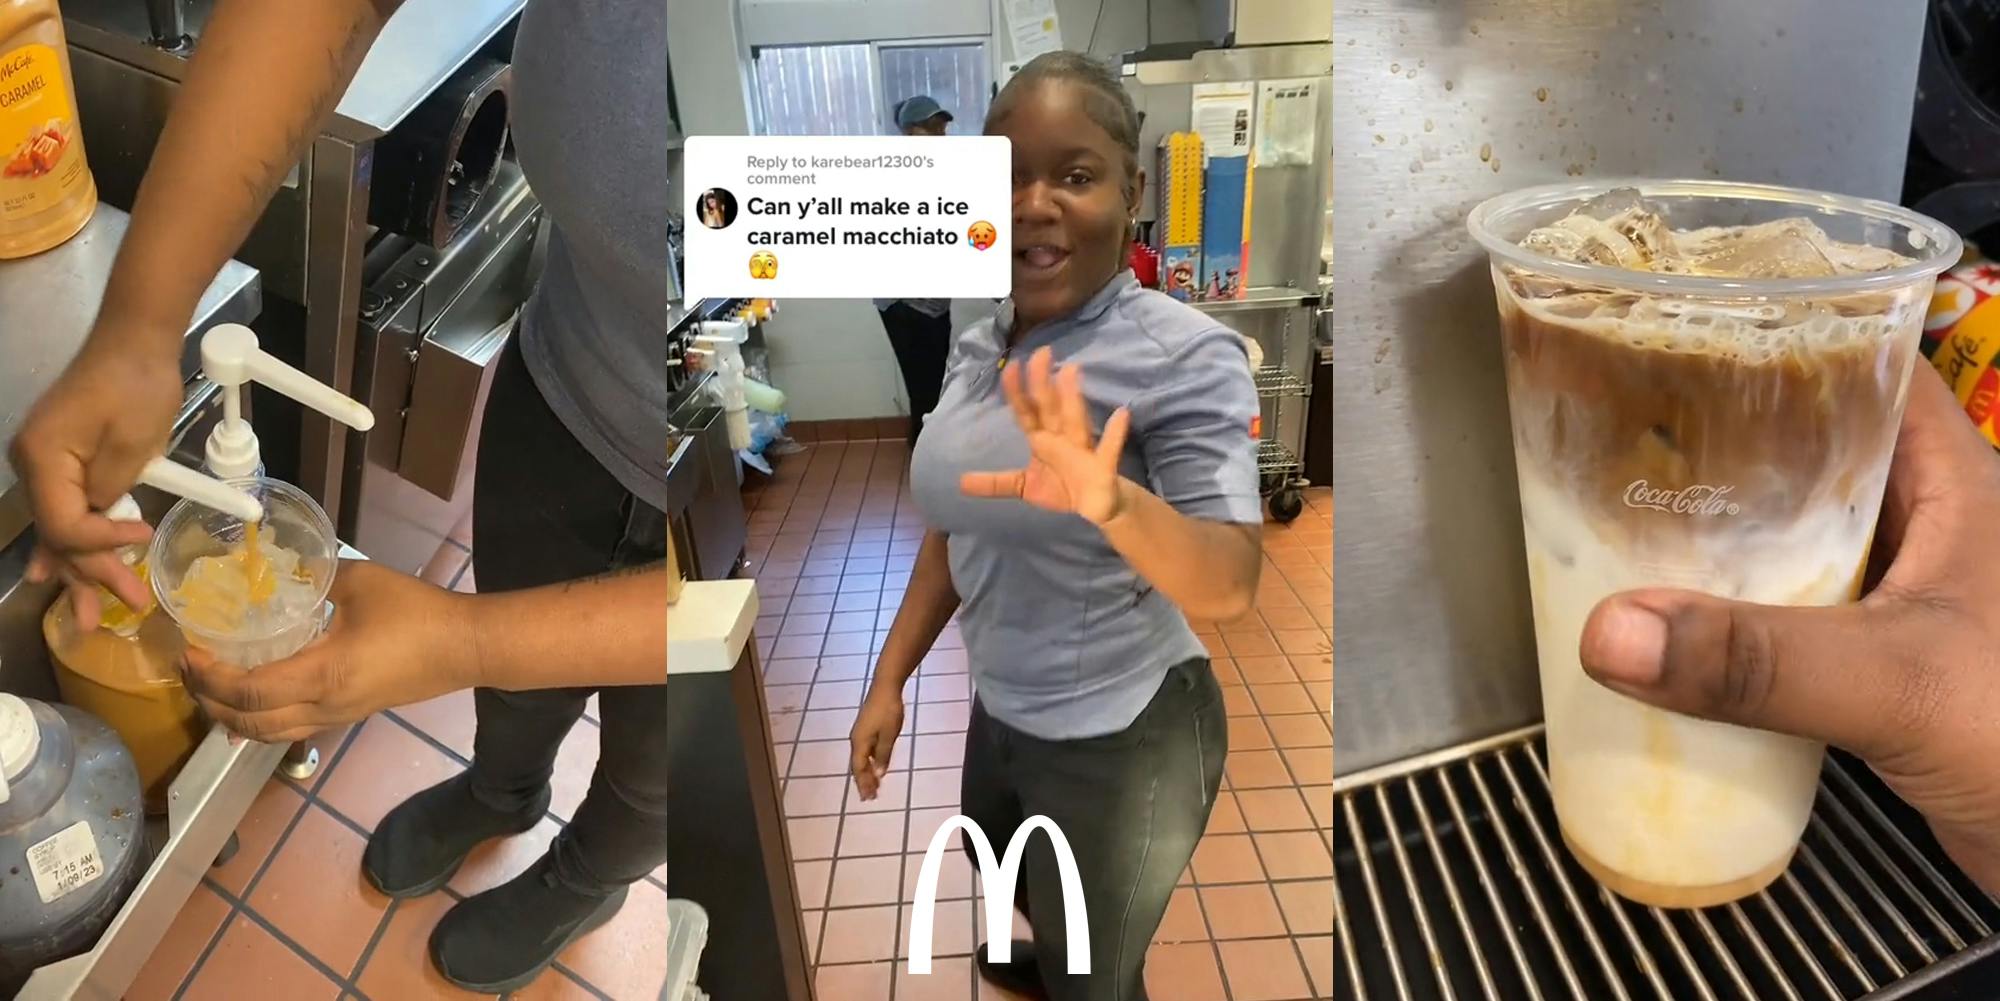 McDonald's employee making coffee pumping syrup into cup (l) McDonald's employee speaking with caption "Can y'all make a ice caramel macchiato" with McDonald's "m" logo at bottom (c) McDonald's employee holding cup of iced coffee (r)